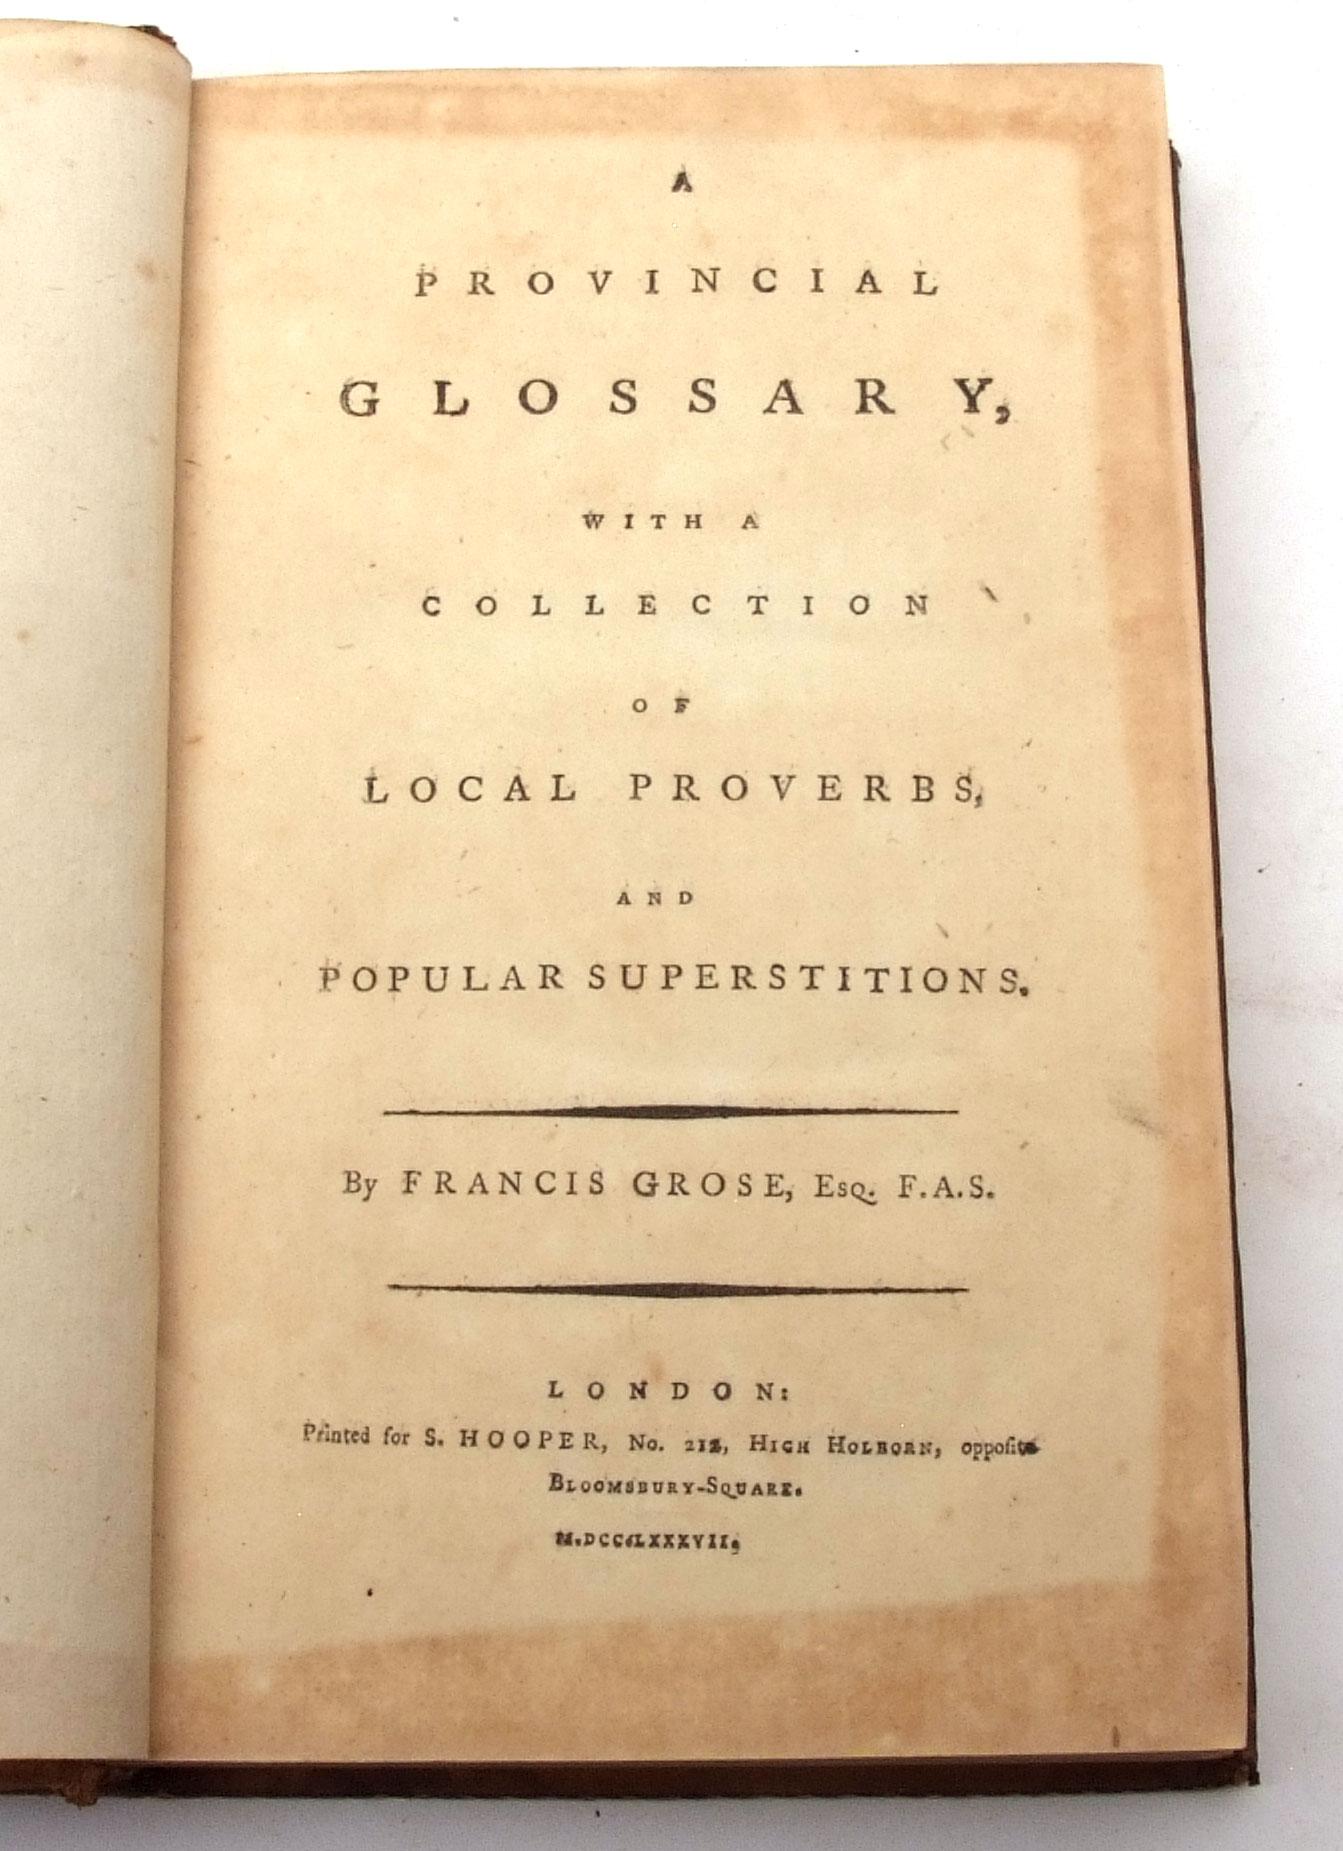 FRANCIS GROSE: A PROVINCIAL GLOSSARY WITH A COLLECTION OF LOCAL PROVERBS AND POPULAR